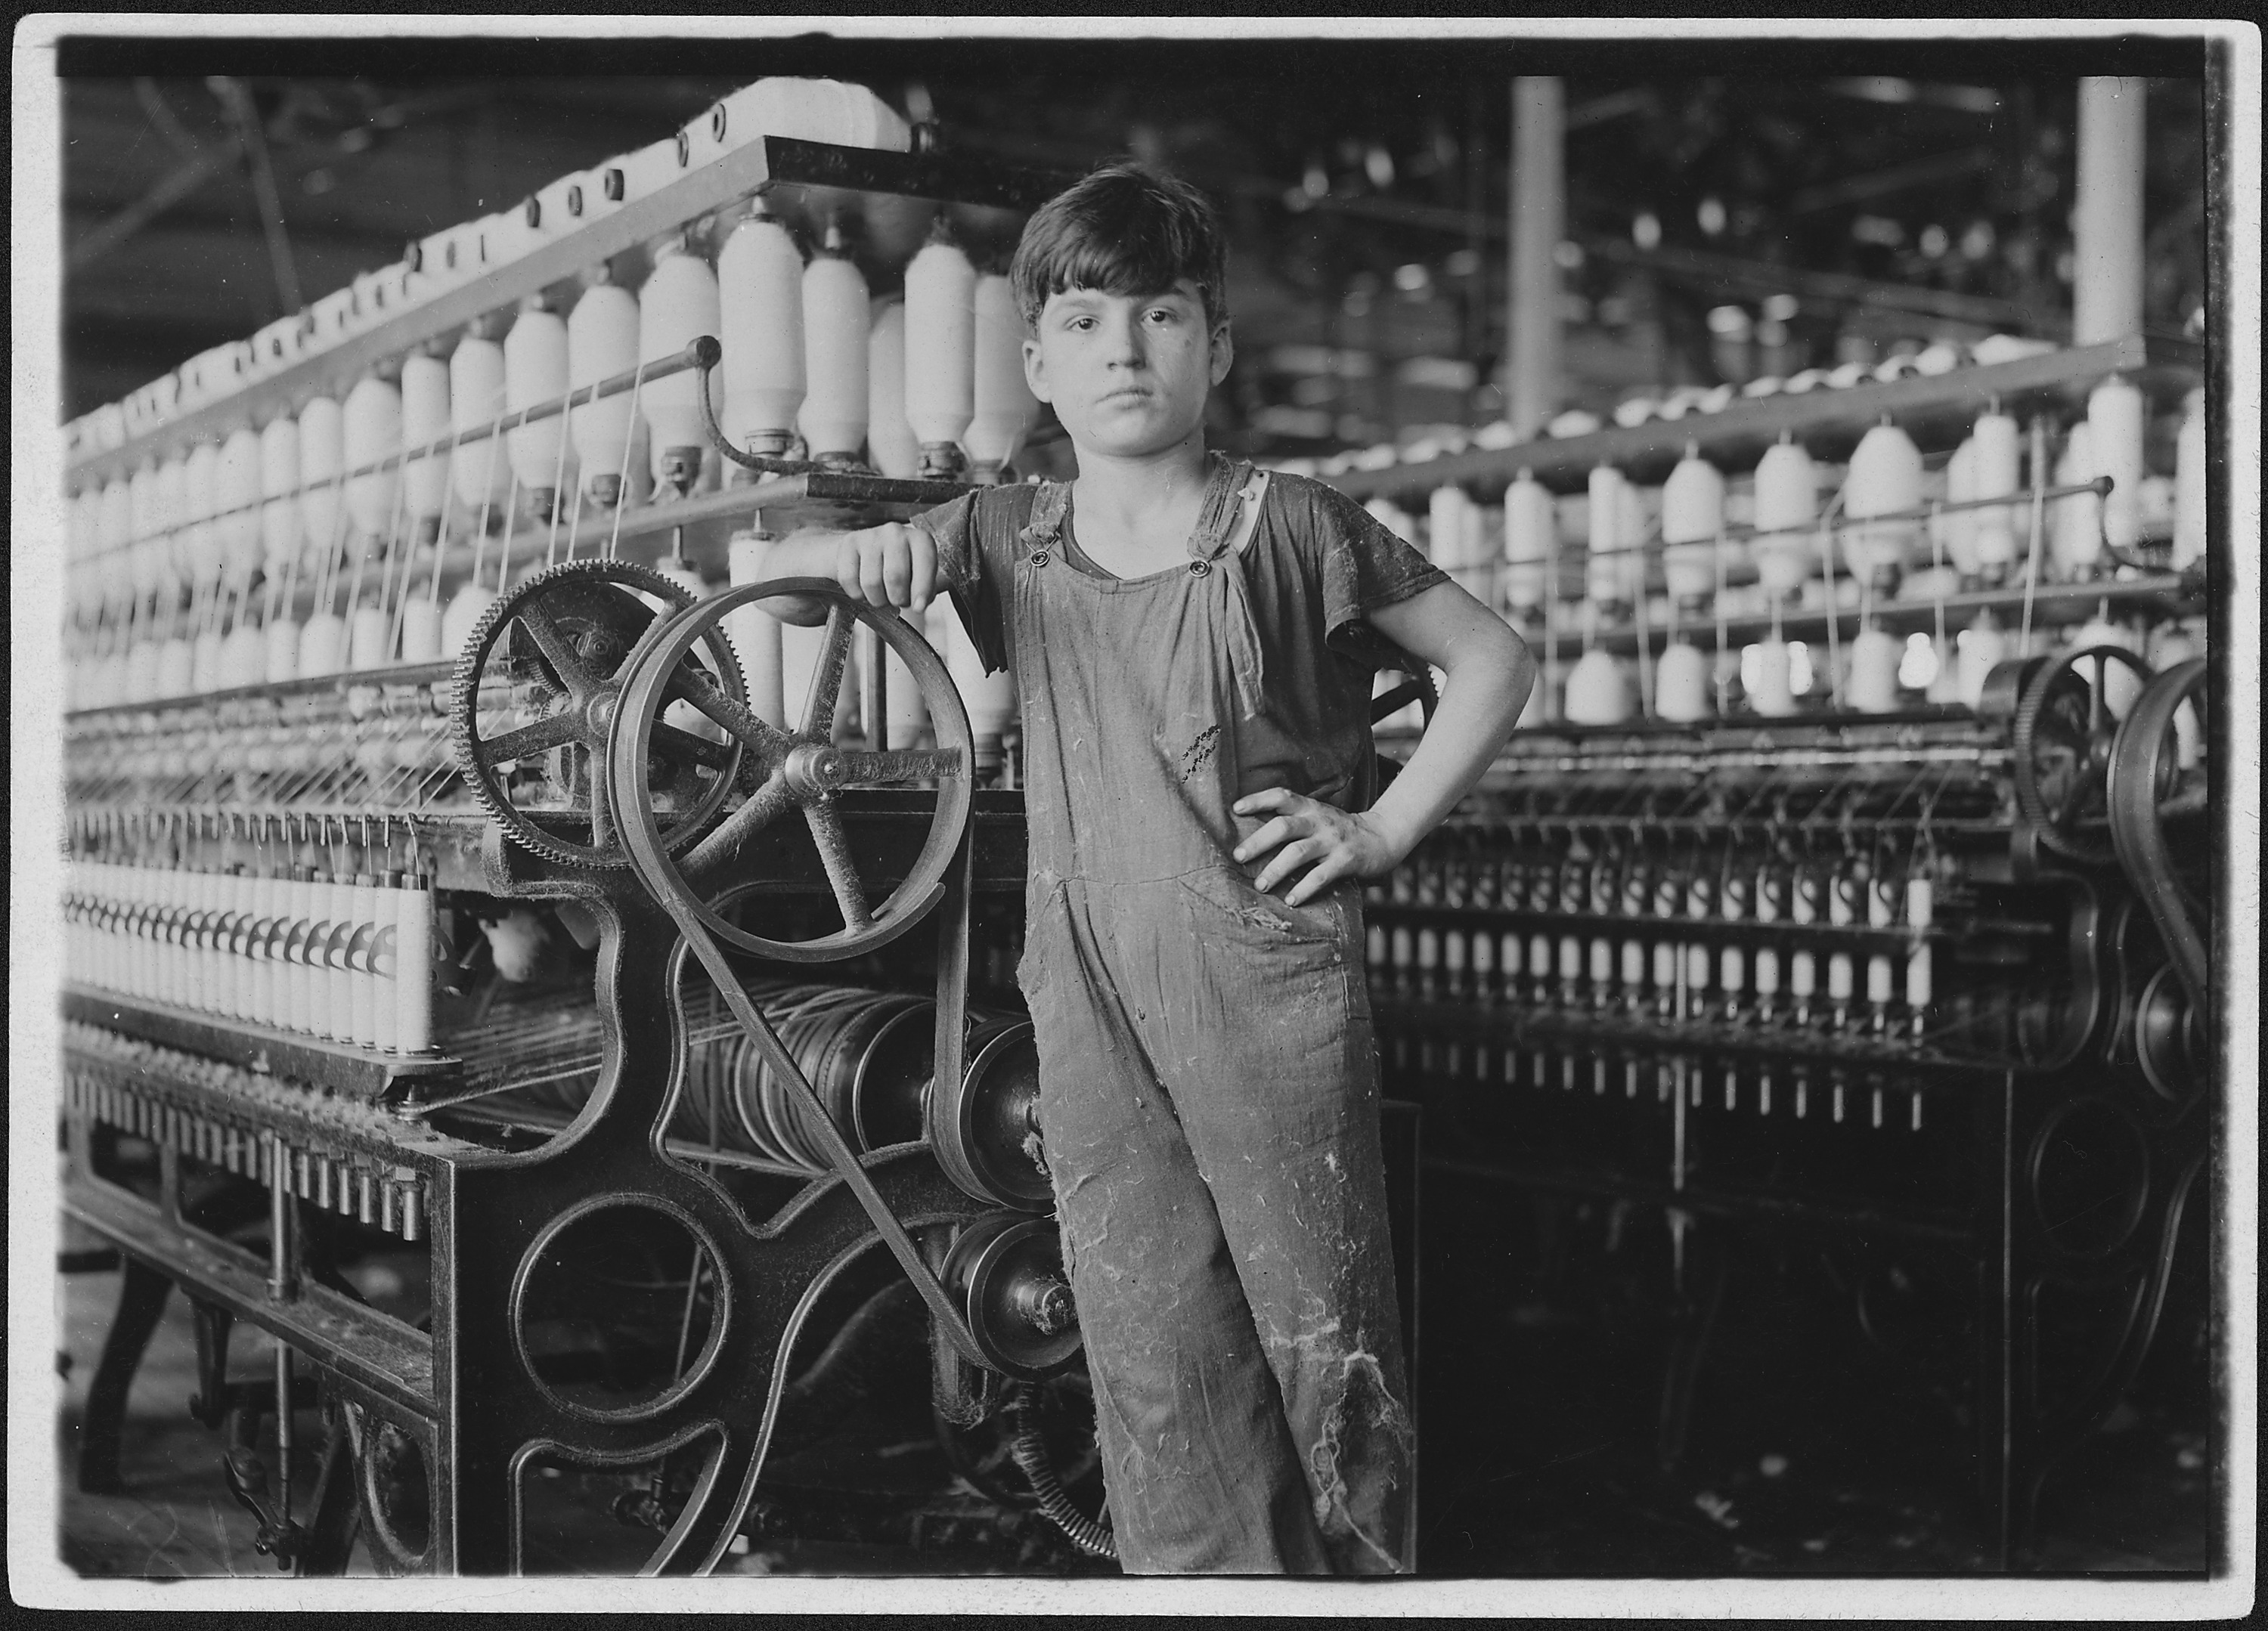 At machine is Stanislaus Beauvais, has worked in spinning room for two years. Salem, Mass. - NARA - 523485